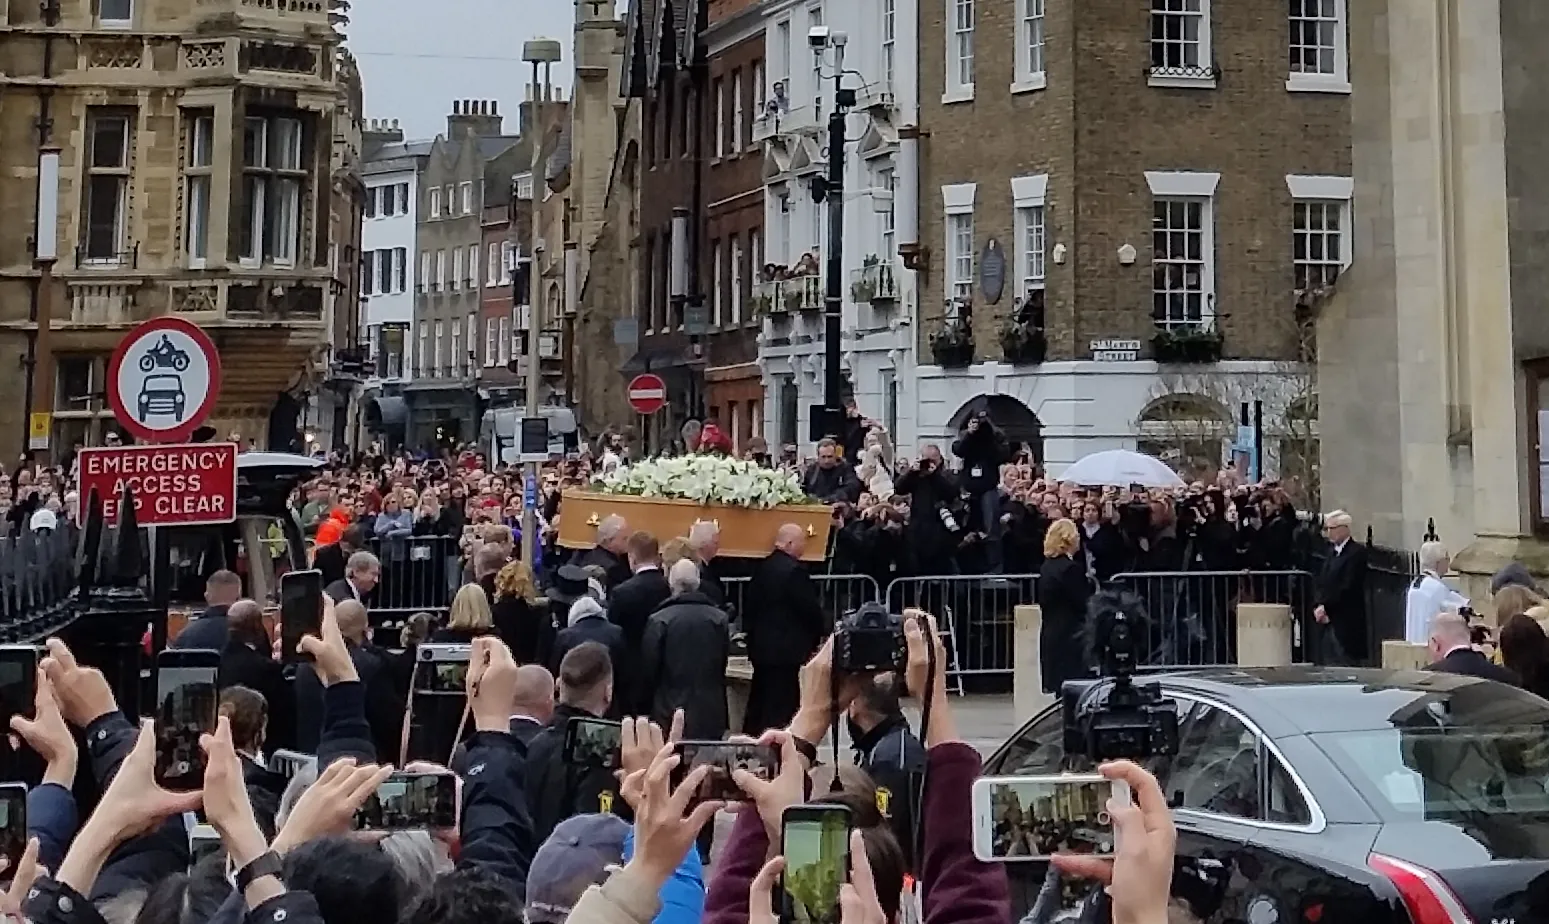 Stephen Hawking's coffin is carrying to Great St Mary's Church in Cambridge